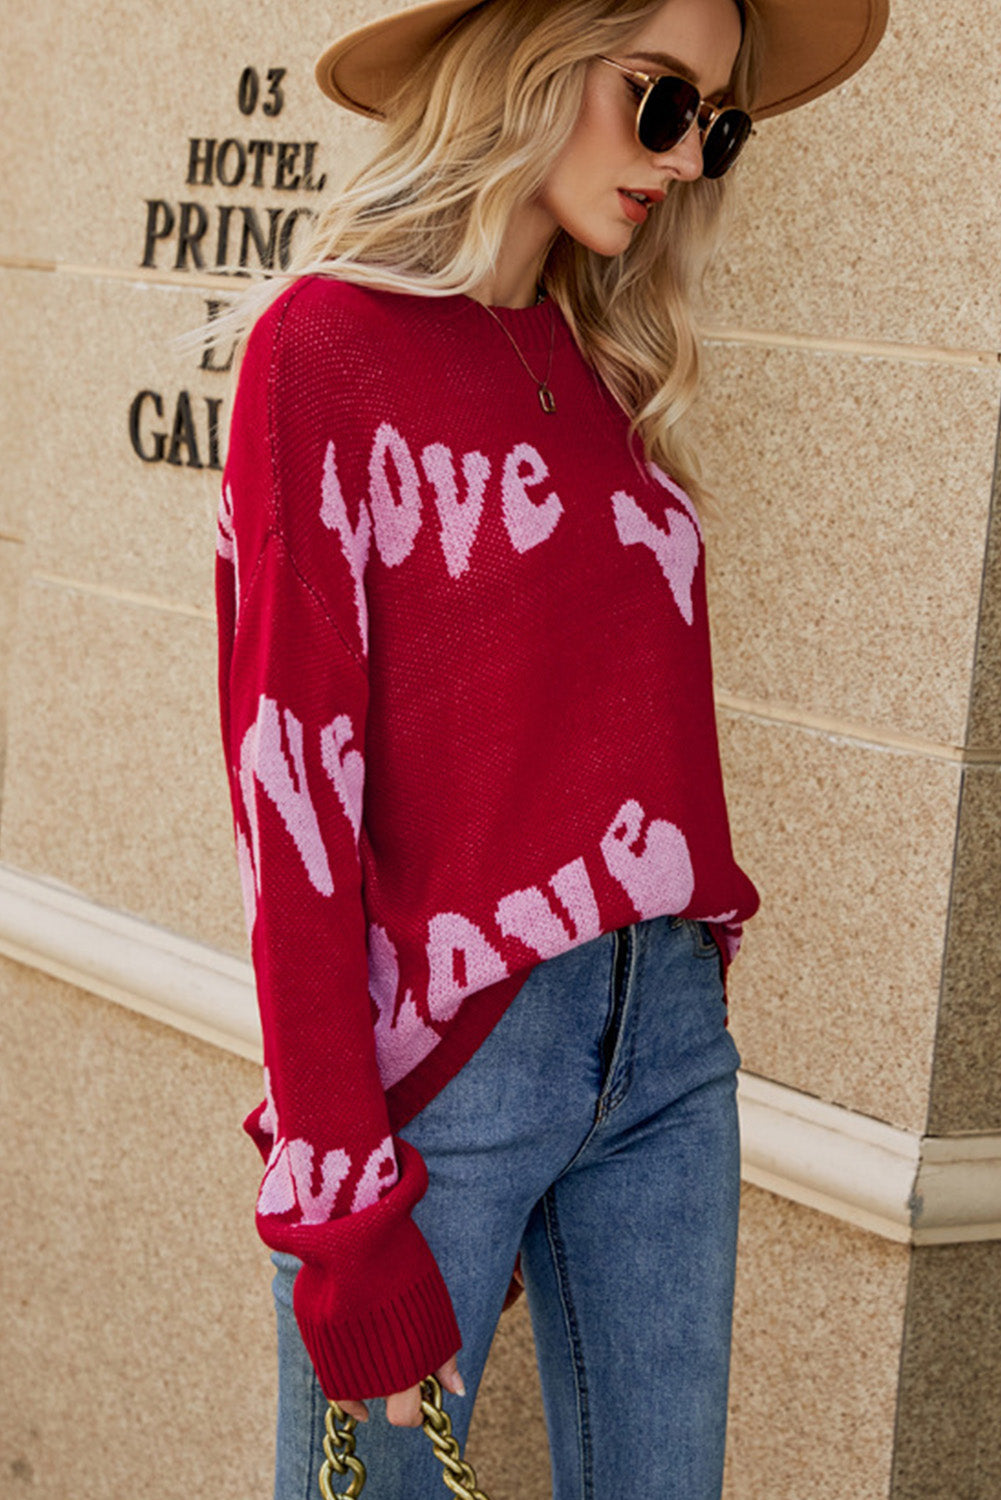 Racing Red Groovy LOVE Slouchy Sweater